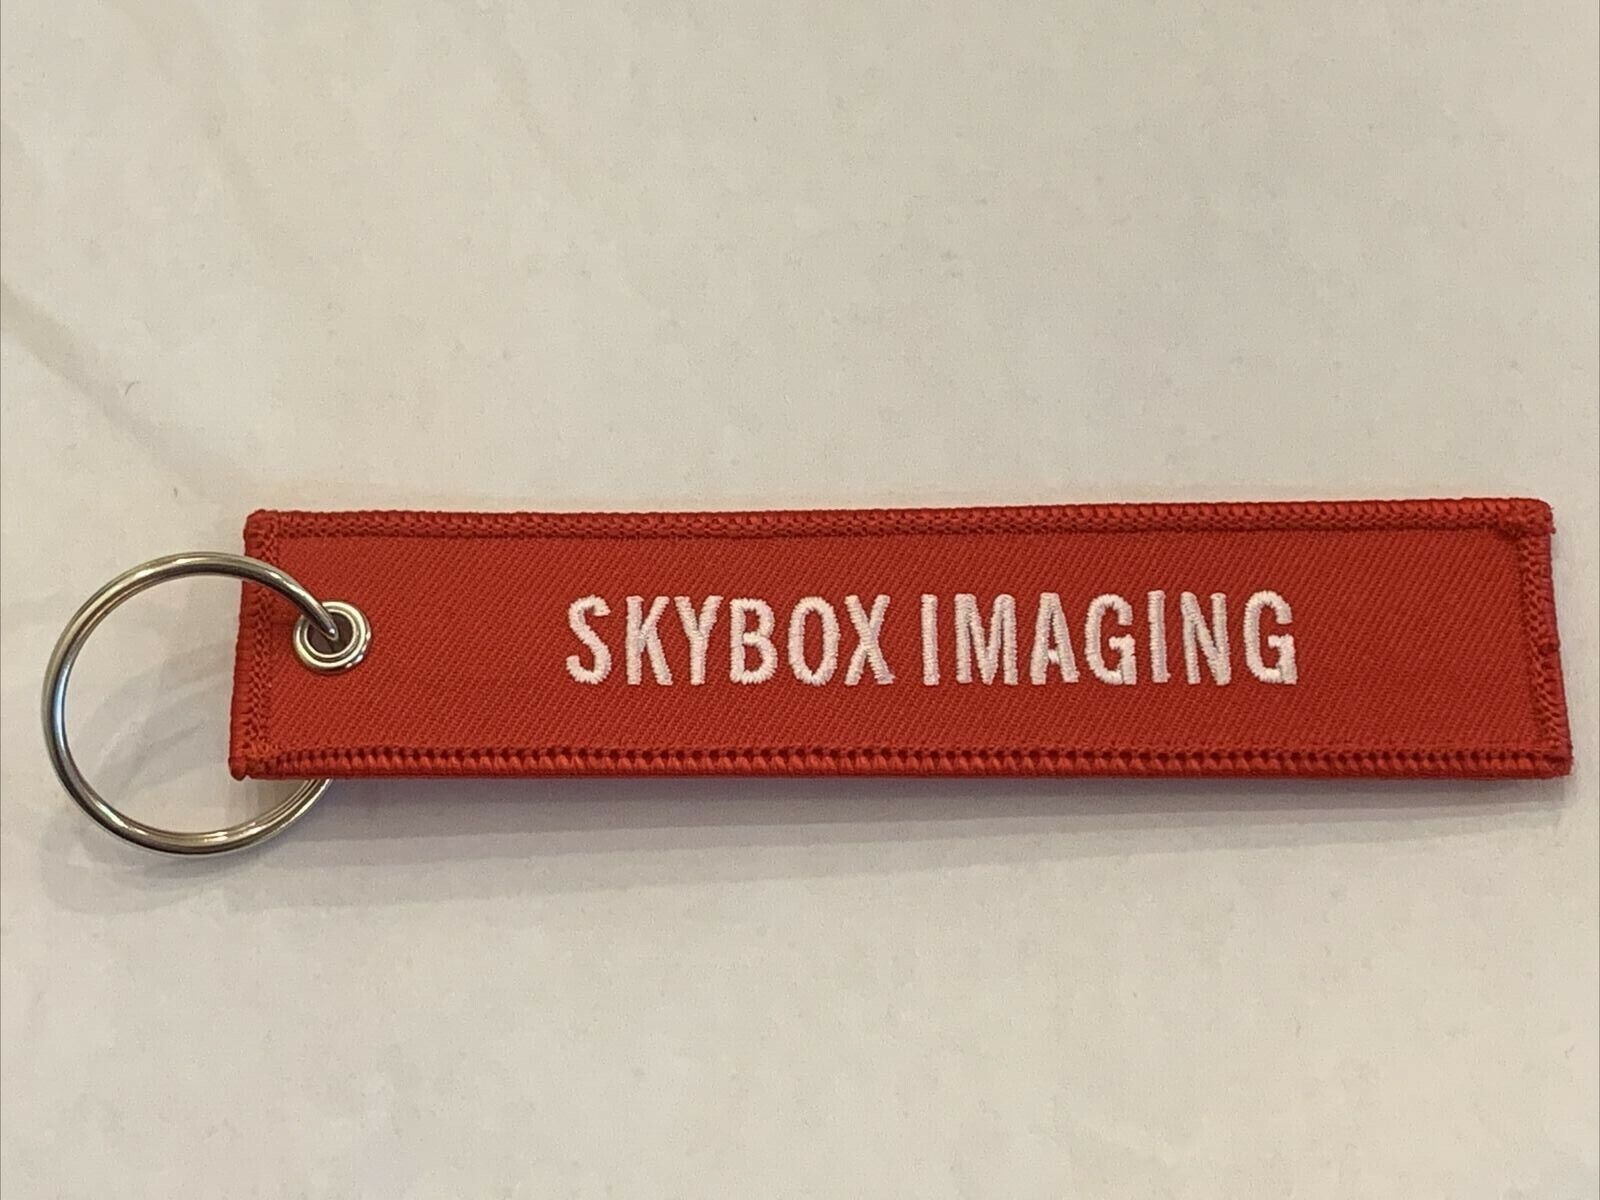 Skybox Imaging KEY CHAIN Planet Labs Satellite REMOVE BEFORE LAUNCH 